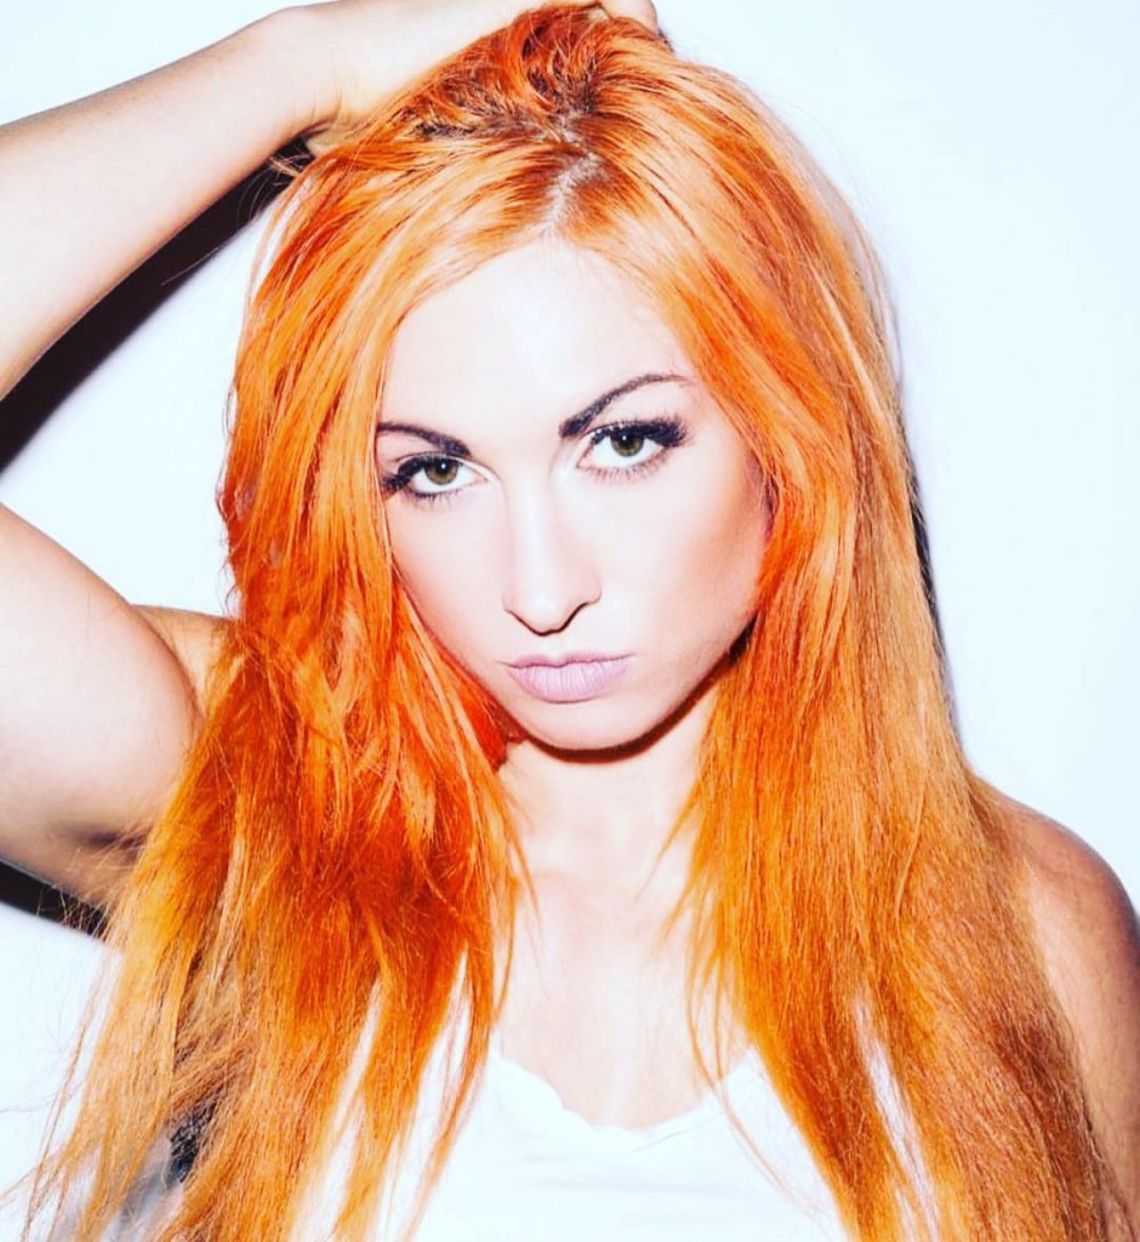 70+ Hot And Sexy Pictures of Becky Lynch – WWE Diva Will Sizzle You Up 55